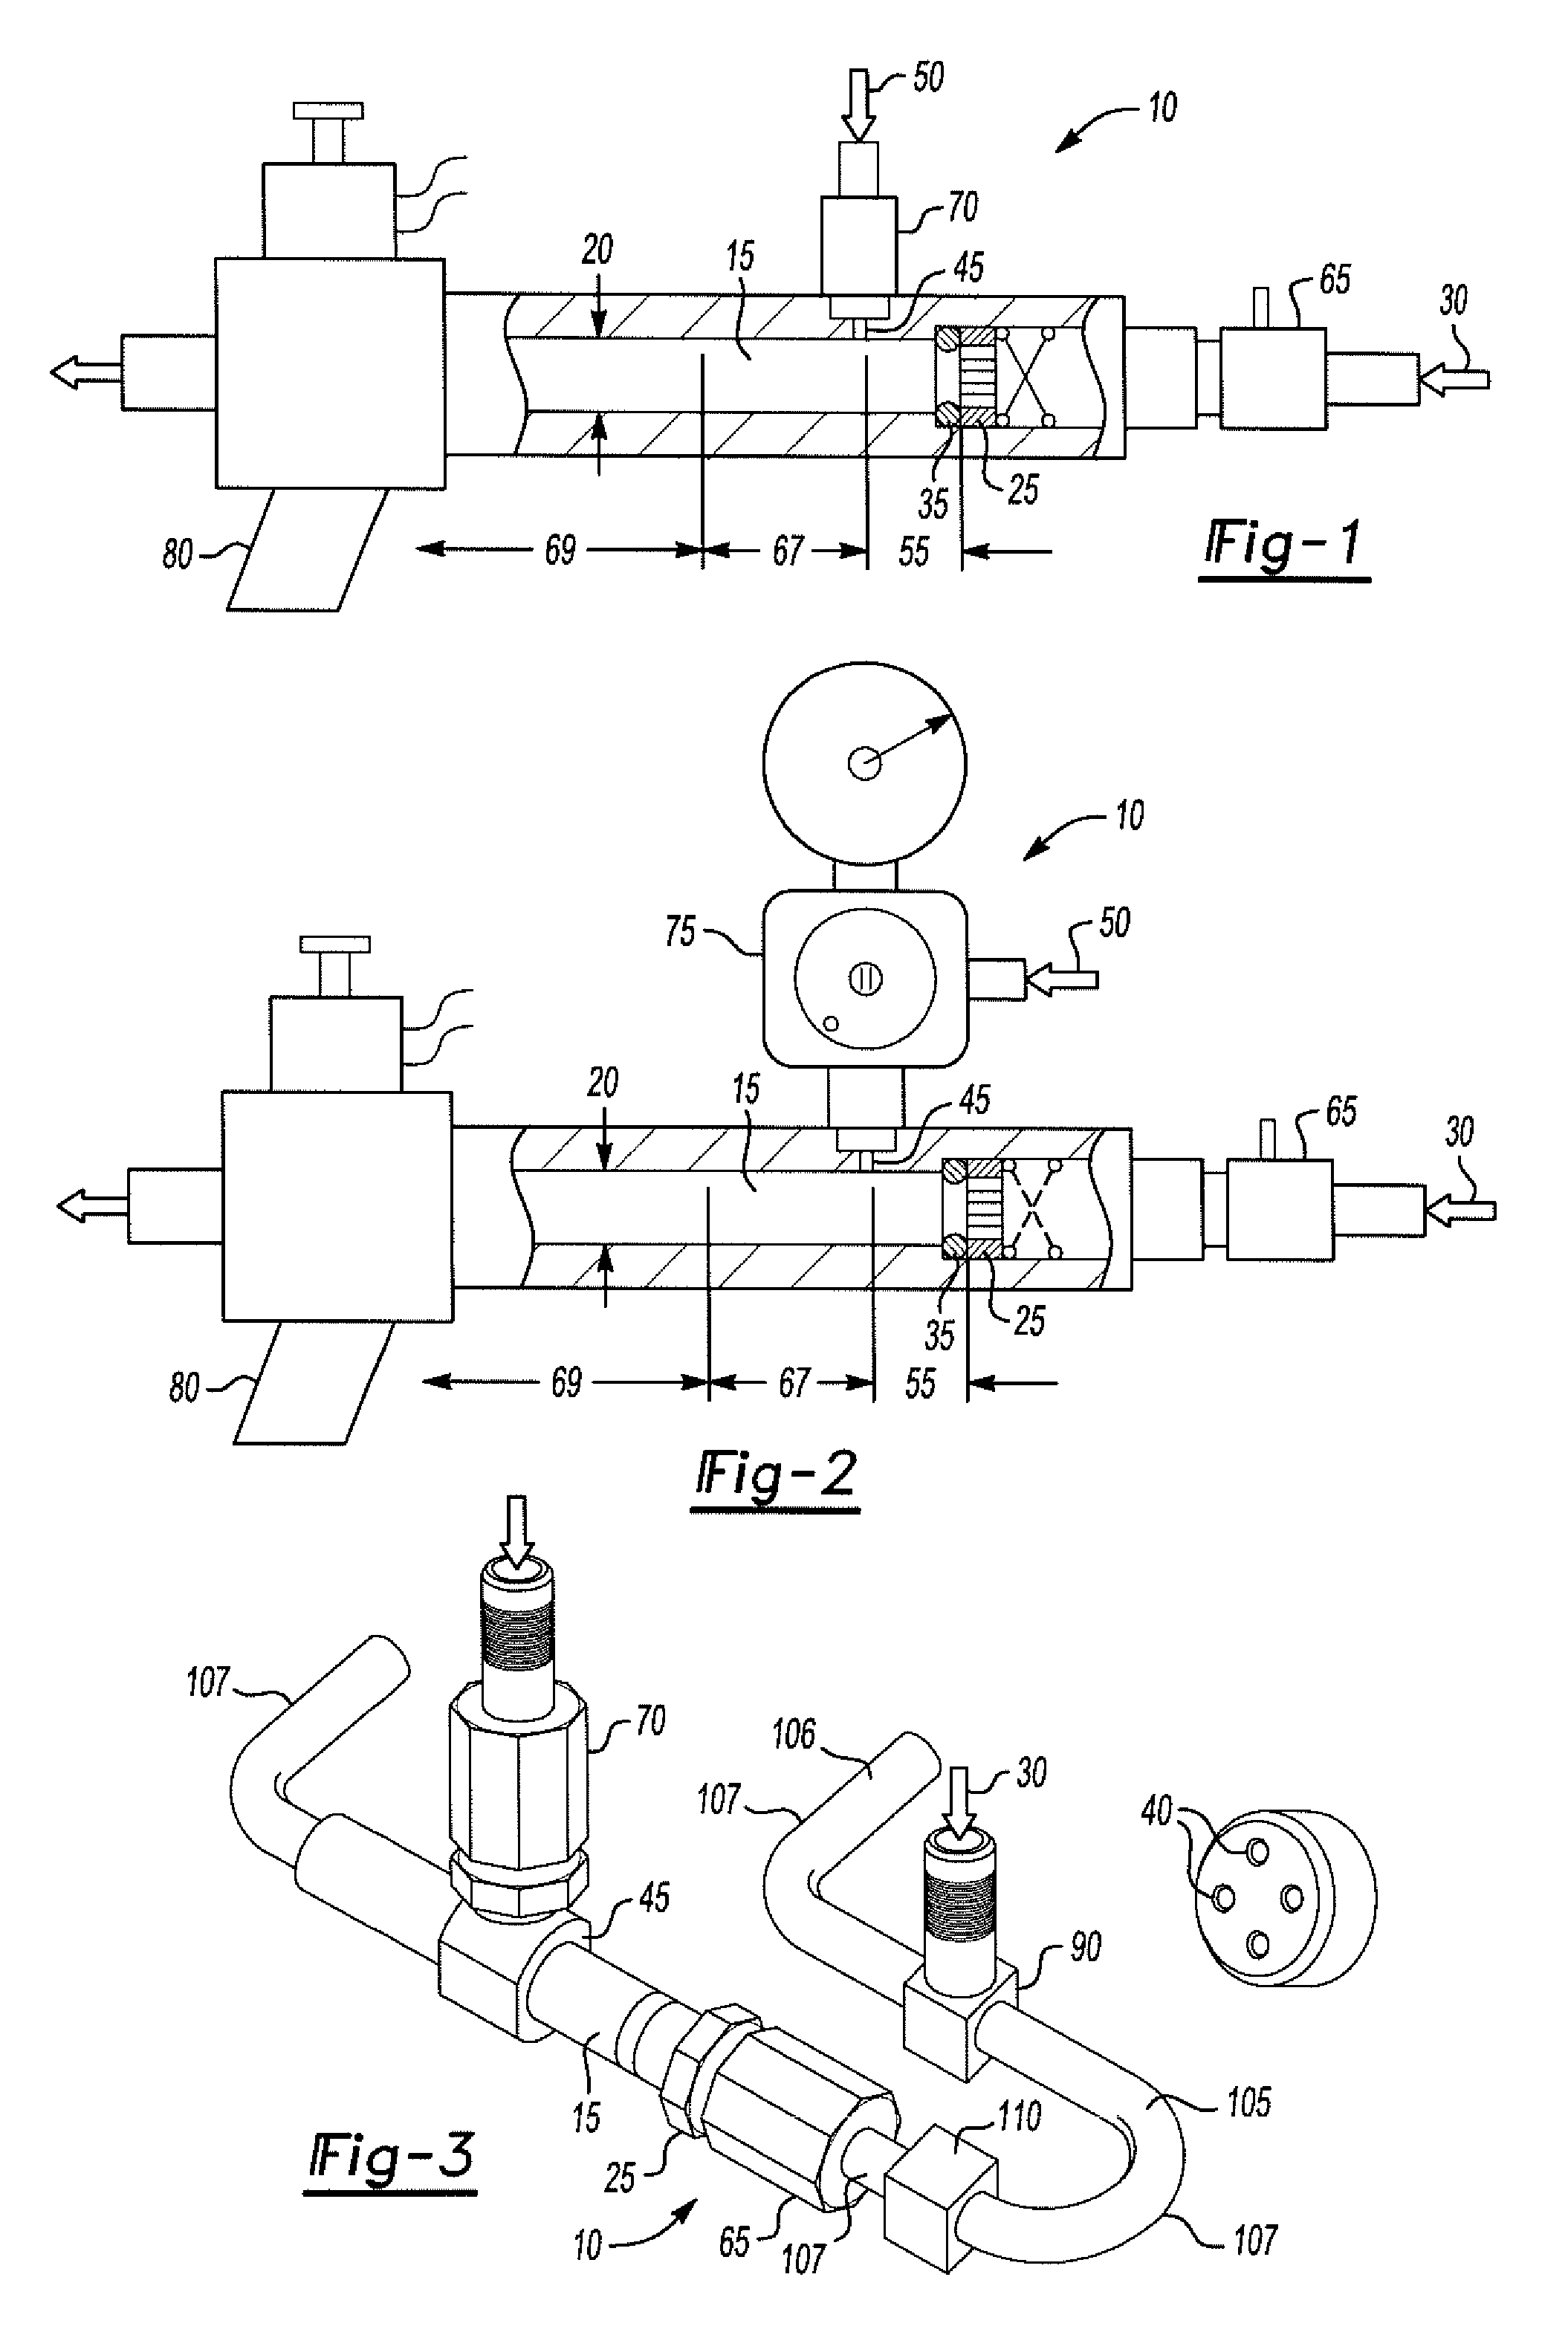 Carbonation apparatus and method for forming a carbonated beverage